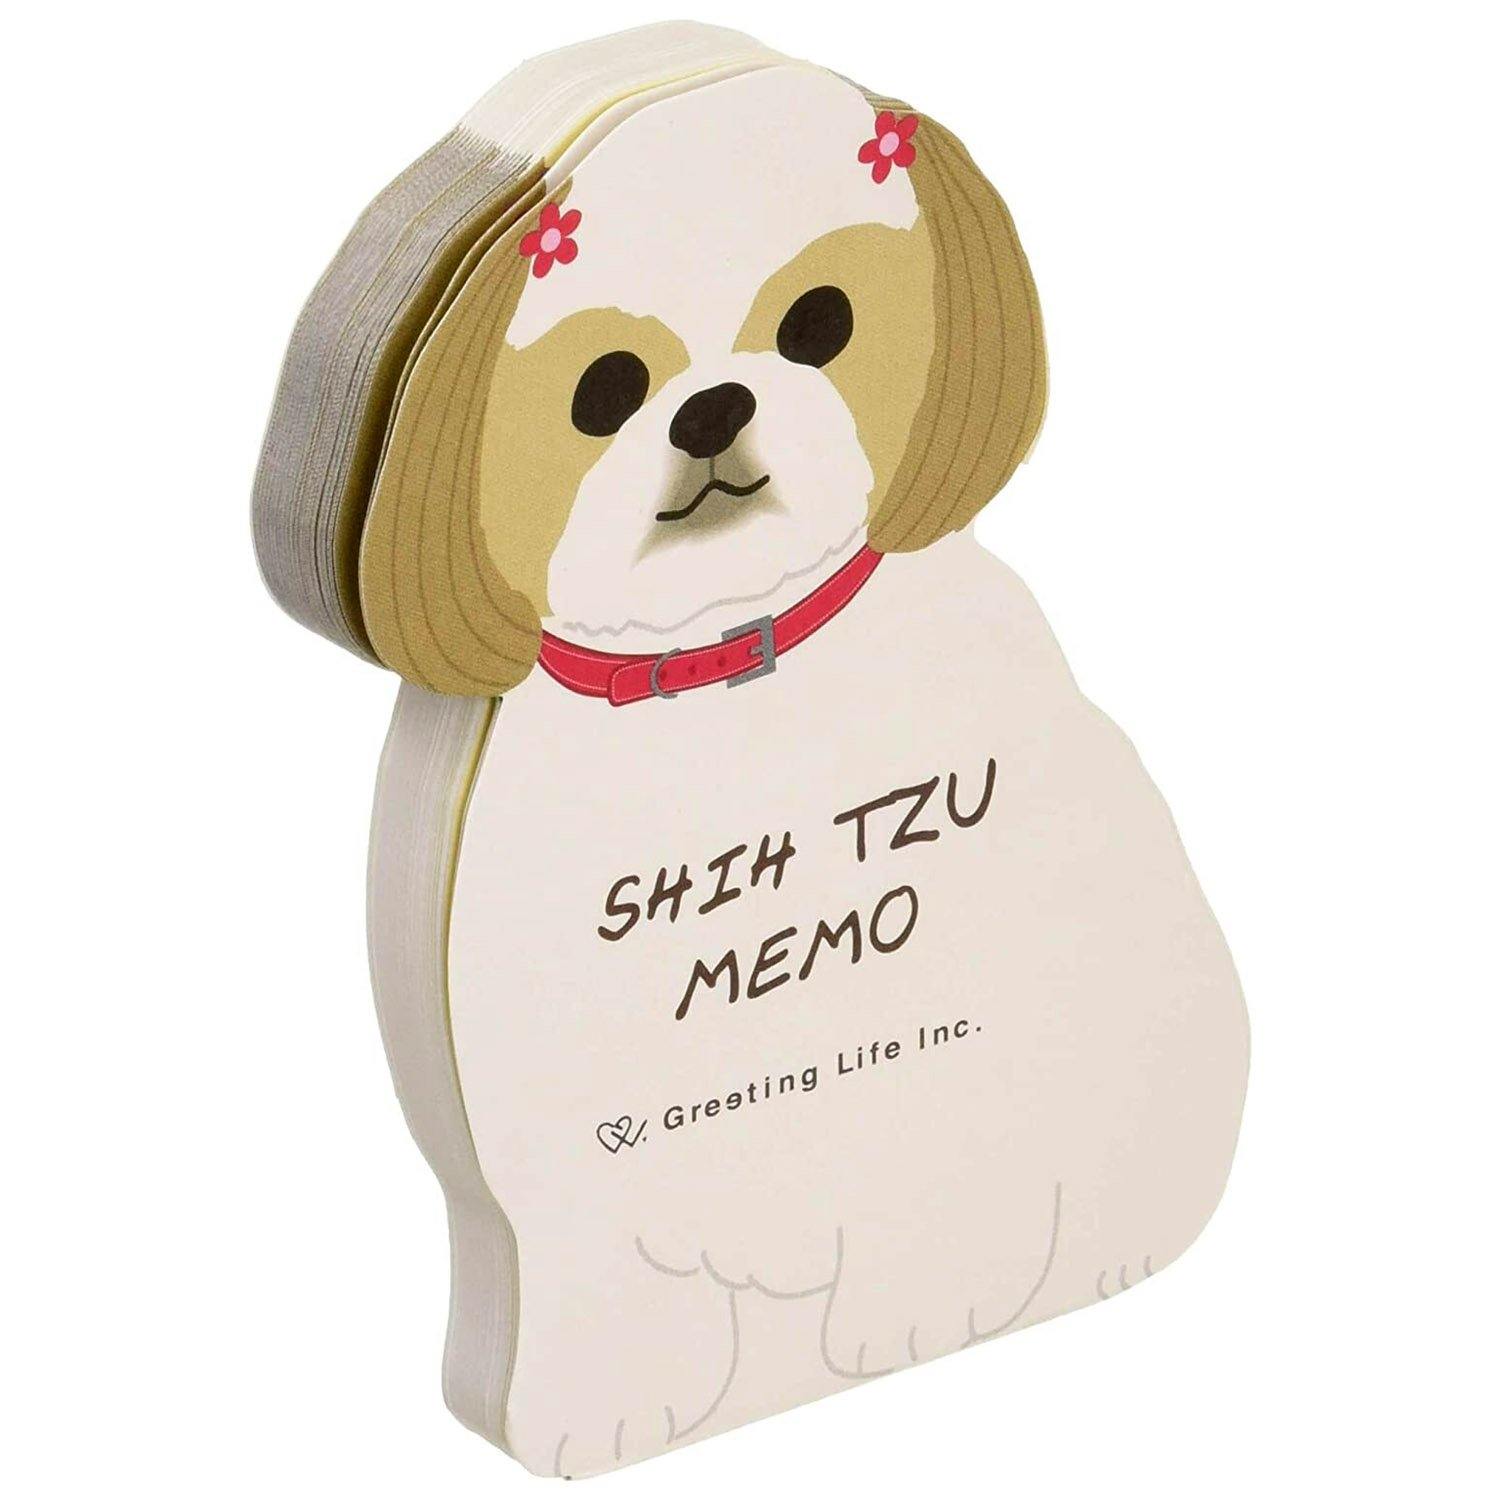 Greeting Life Memo Pad - Die Cut Shih Tzu Dog | papermindstationery.com | boxing, Dog, Greeting Life, Memo Pads, Paper Products, Pet, sale, Stationery